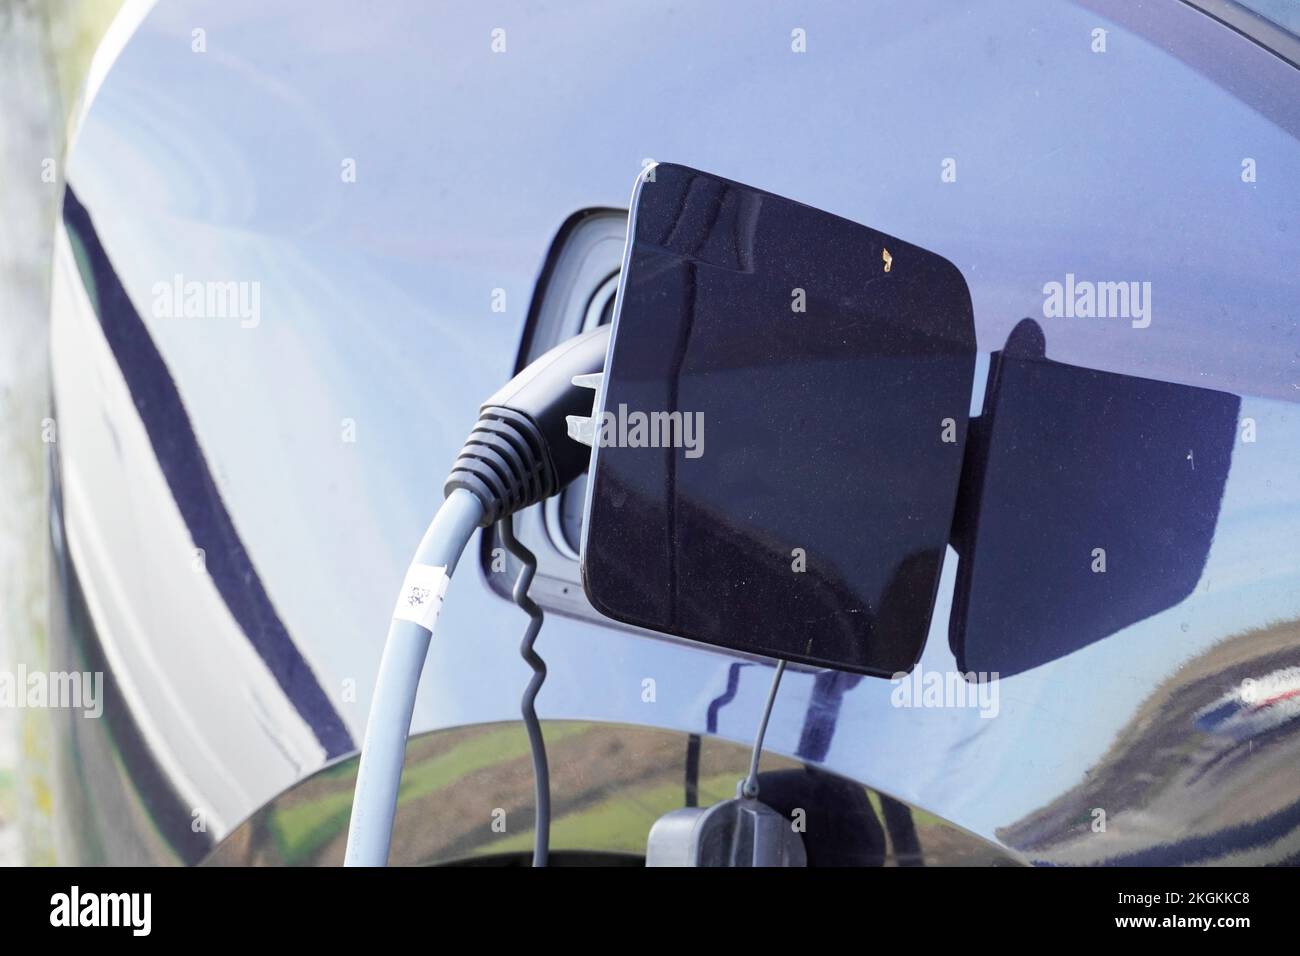 Charging station for electric cars. Charging the electric vehicle at a charging station. Stock Photo